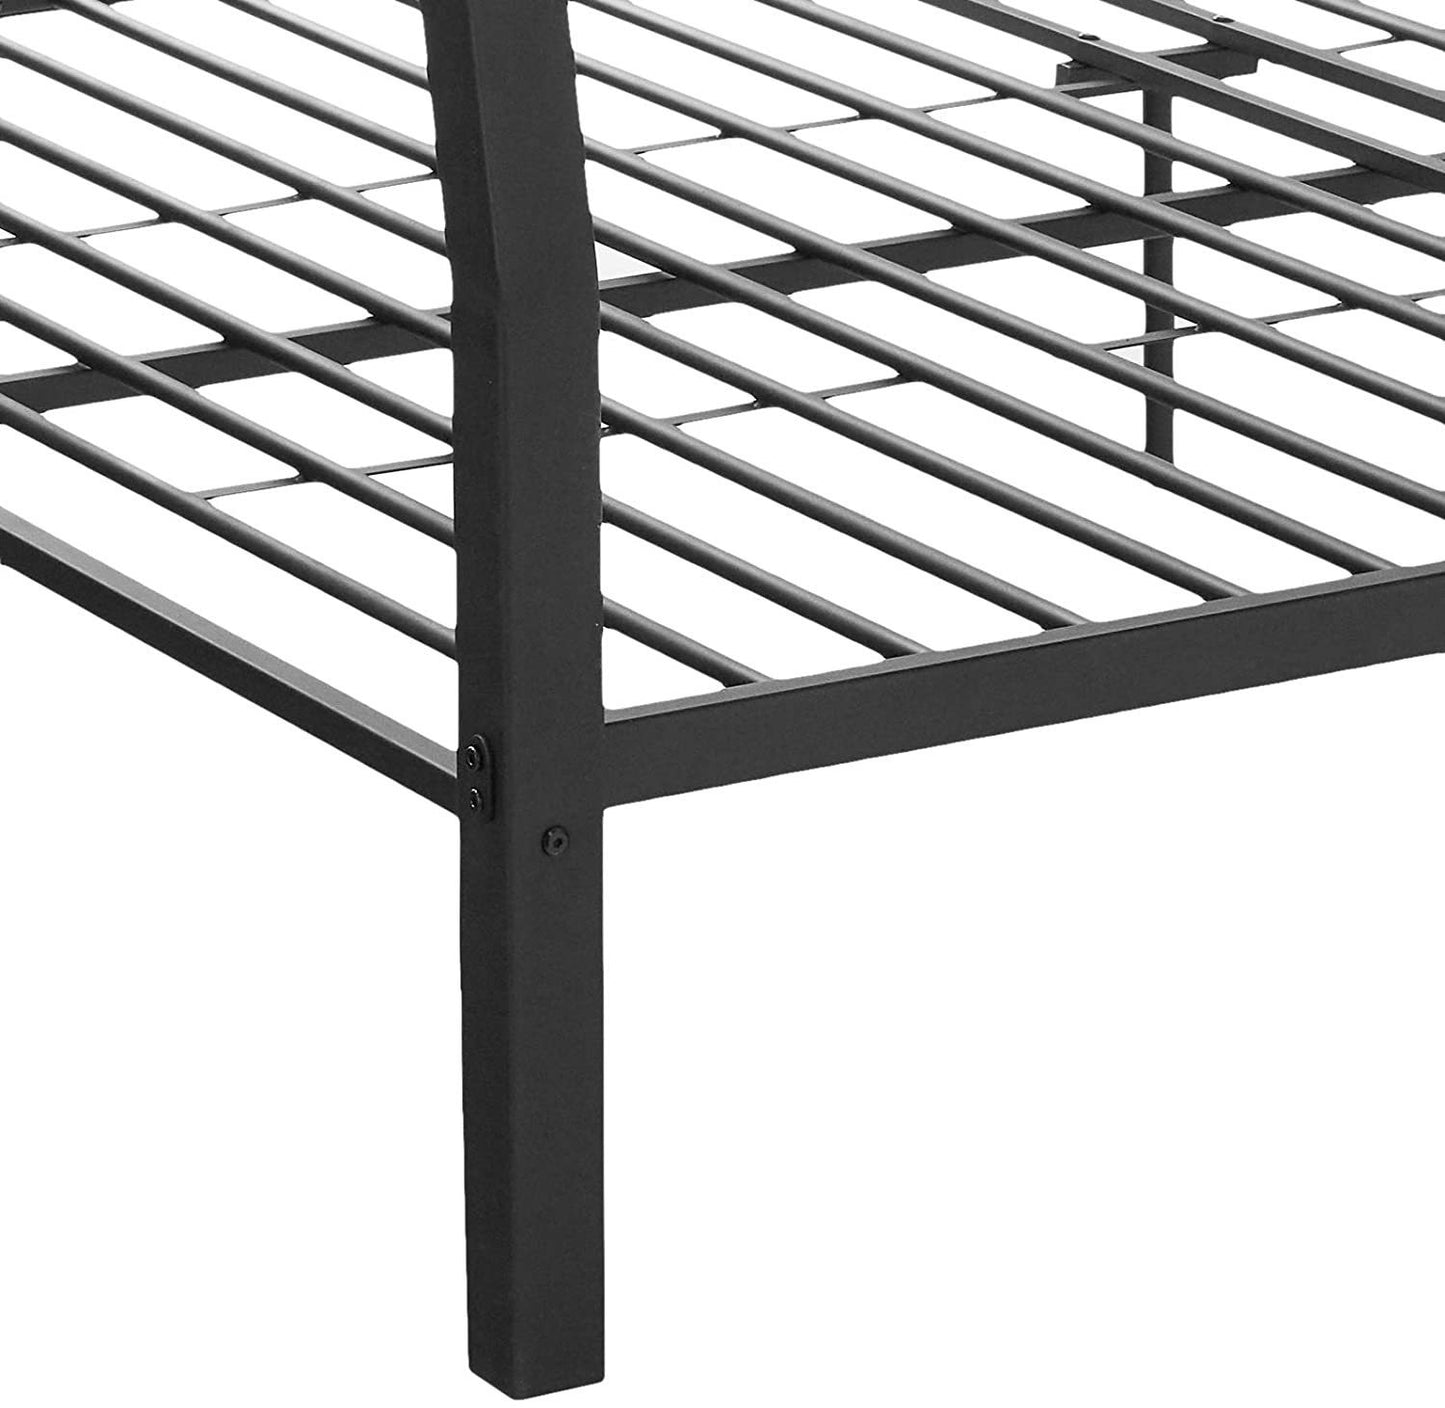 ACME Limbra Full XL/Queen Bunk Bed in Sandy Black